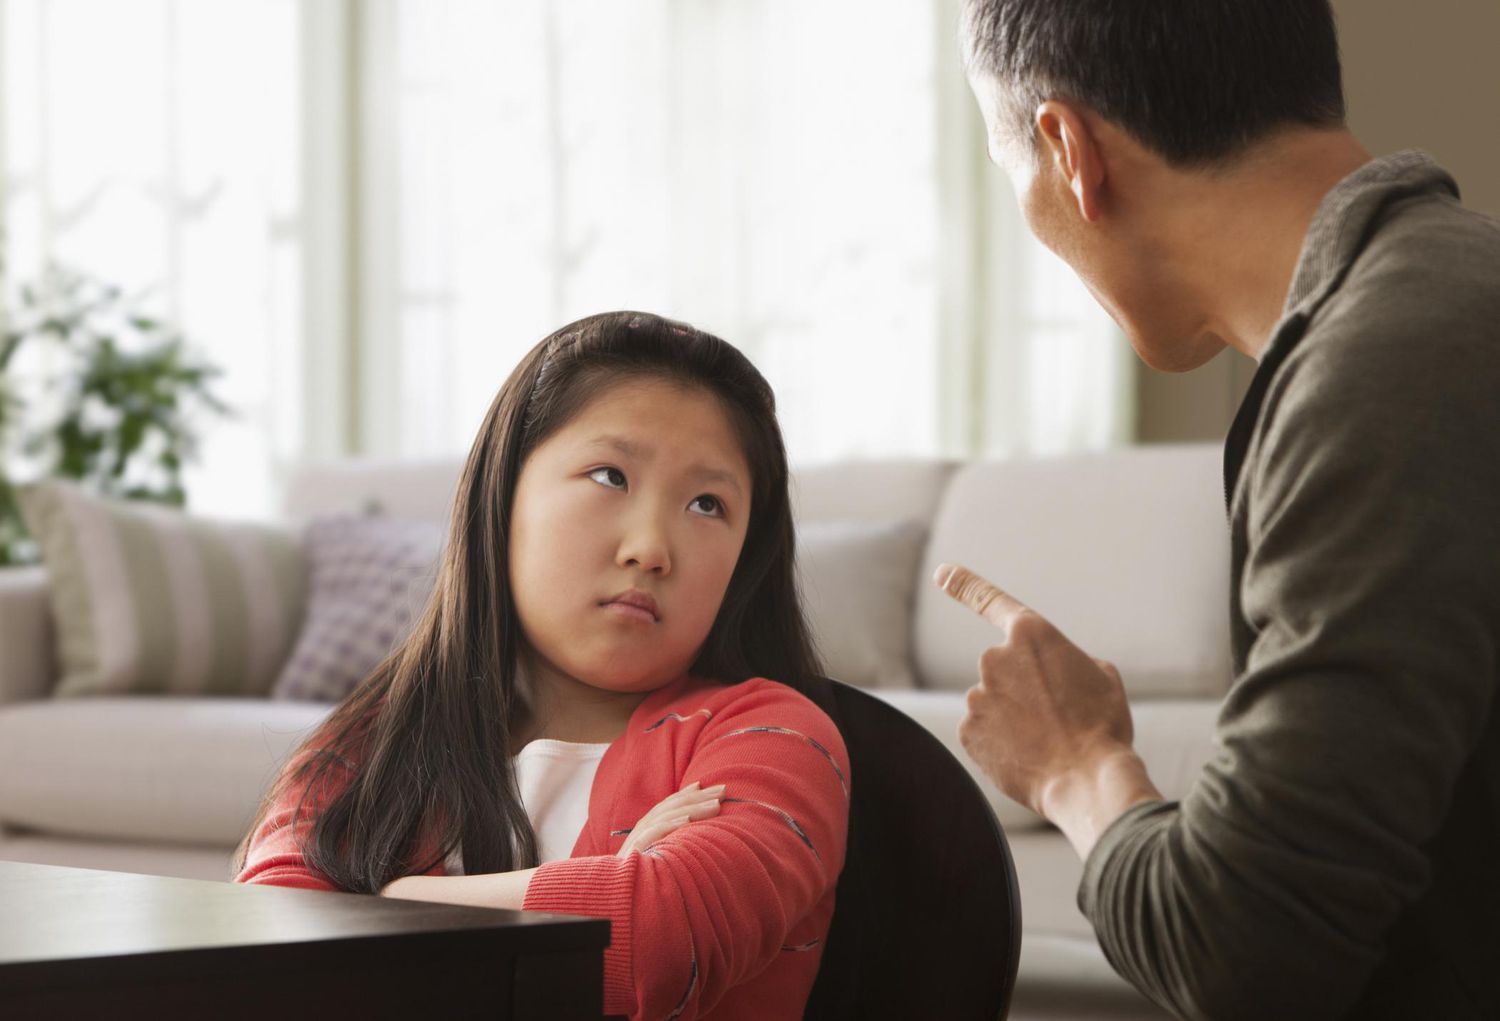 The Challenges of Parenting a Child with Behavior Issues